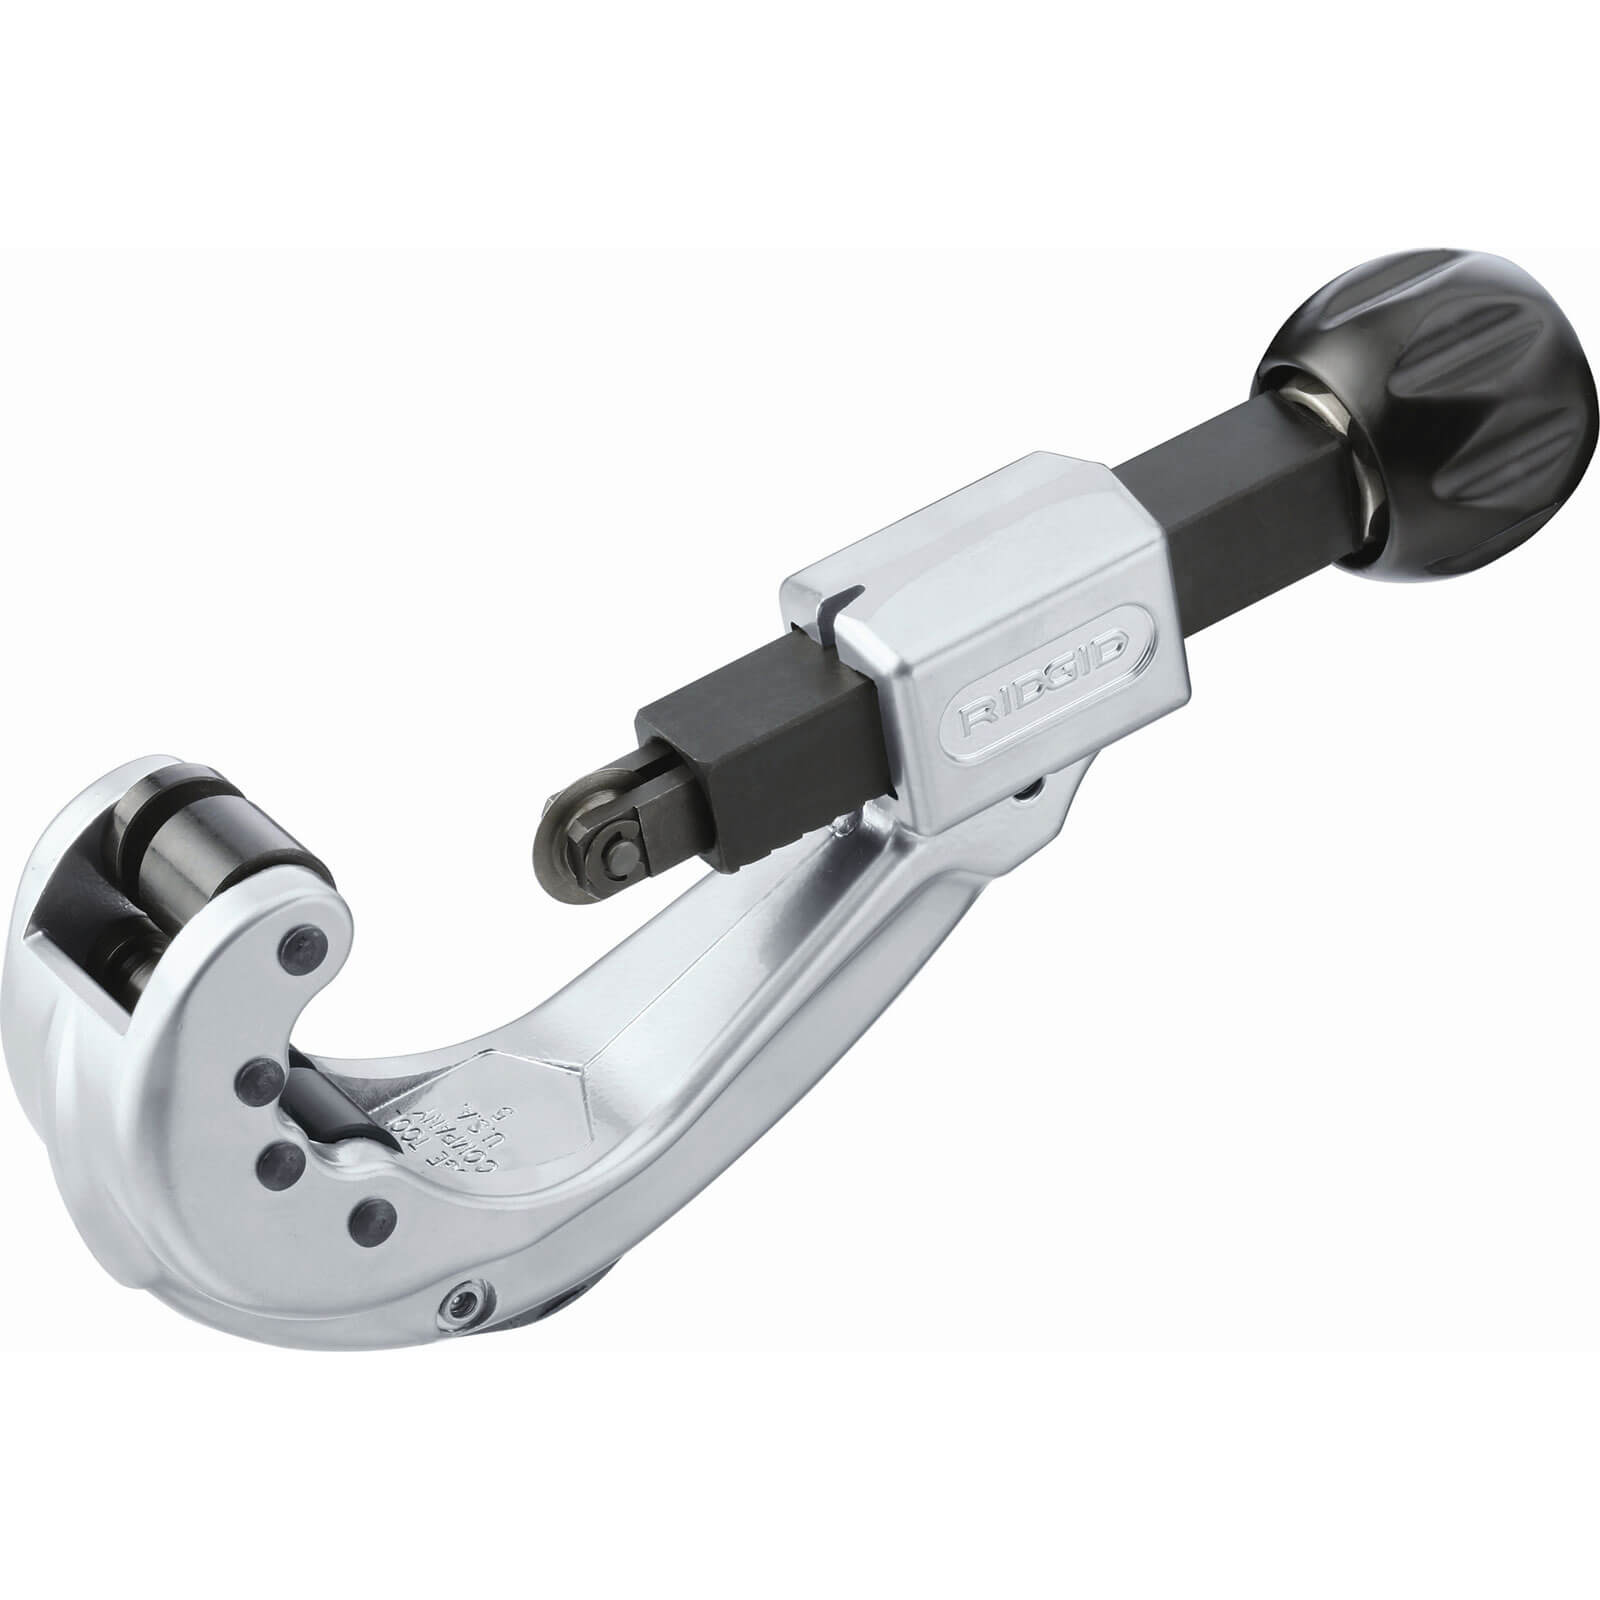 Image of Ridgid Heavy Duty Ratcheting Enclosed Feed Pipe Cutter 6mm - 60mm